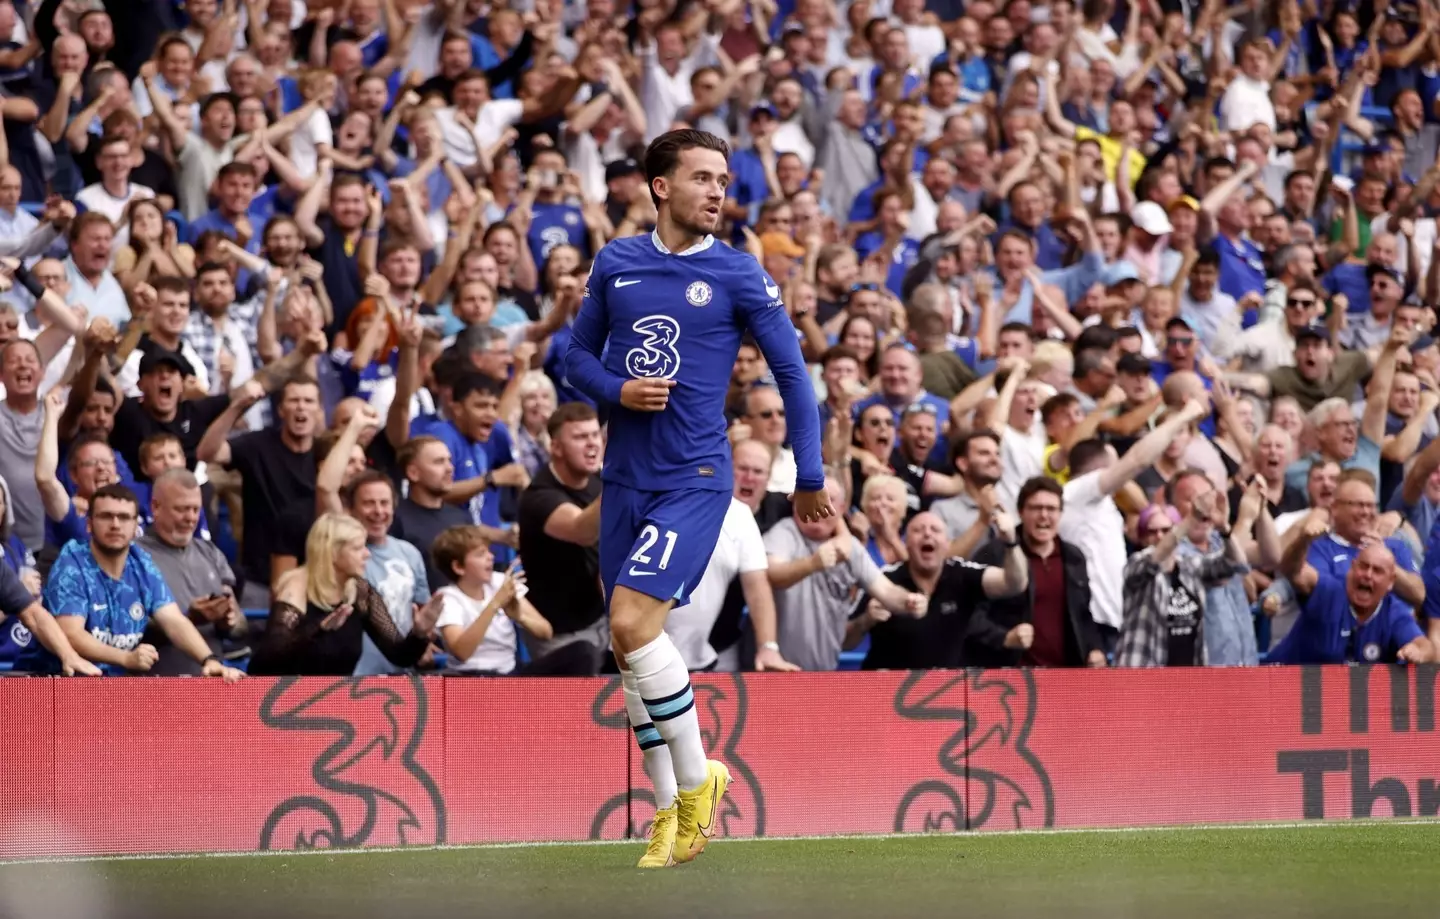 Ben Chilwell after his goal against West Ham. (Chelsea FC)